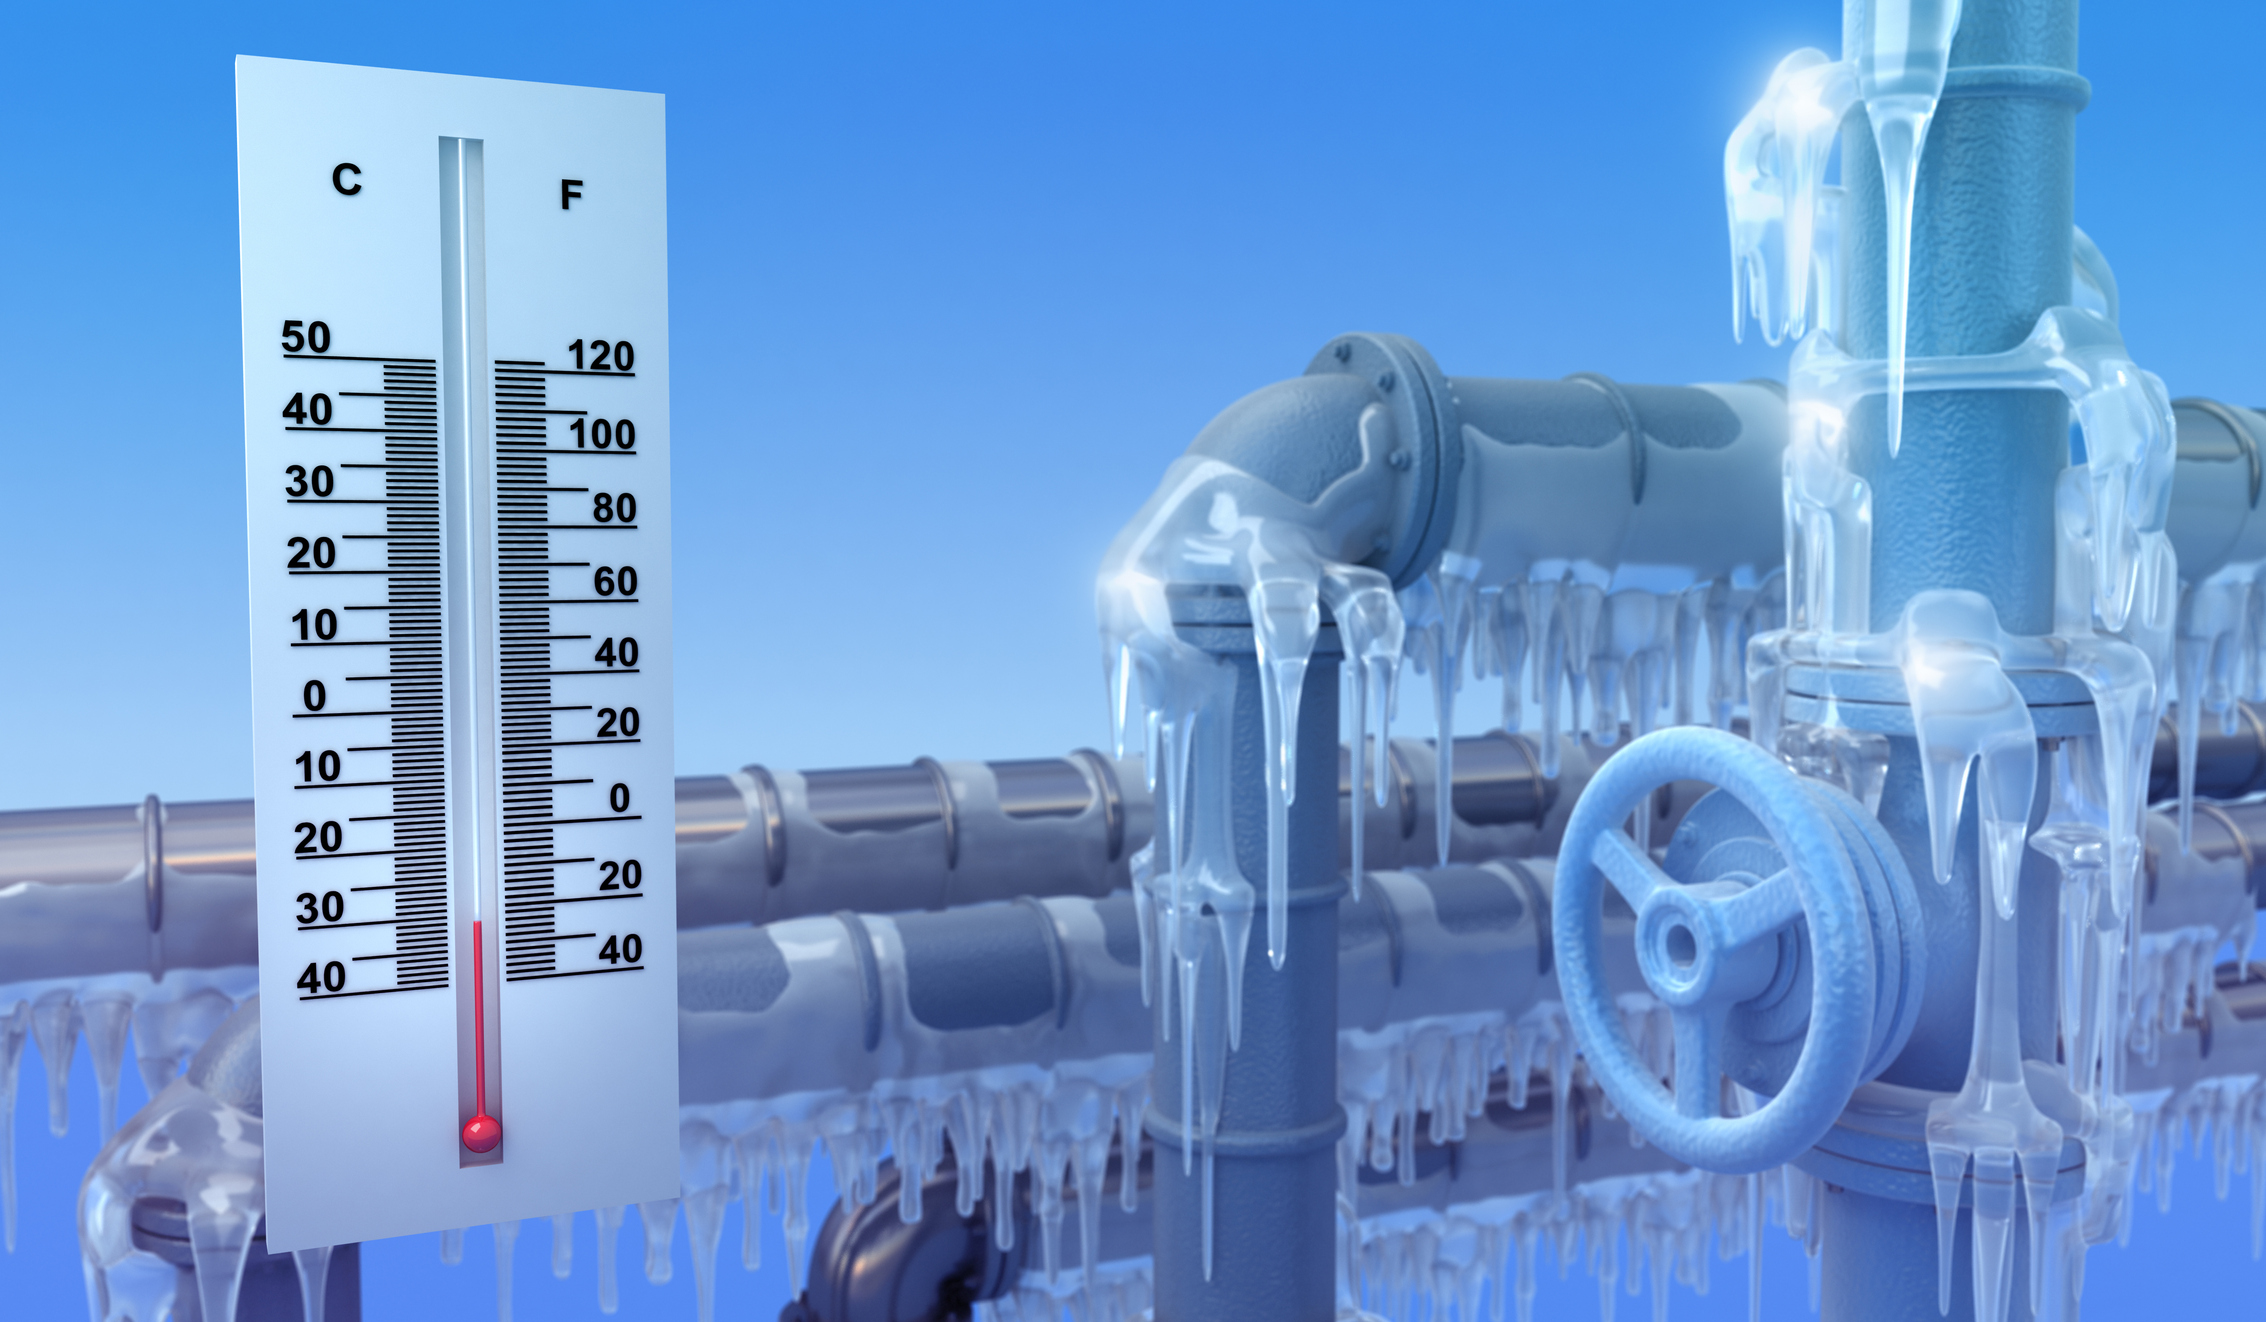 Have You Protected Your Pipes from Freezing Over the Winter Holidays?